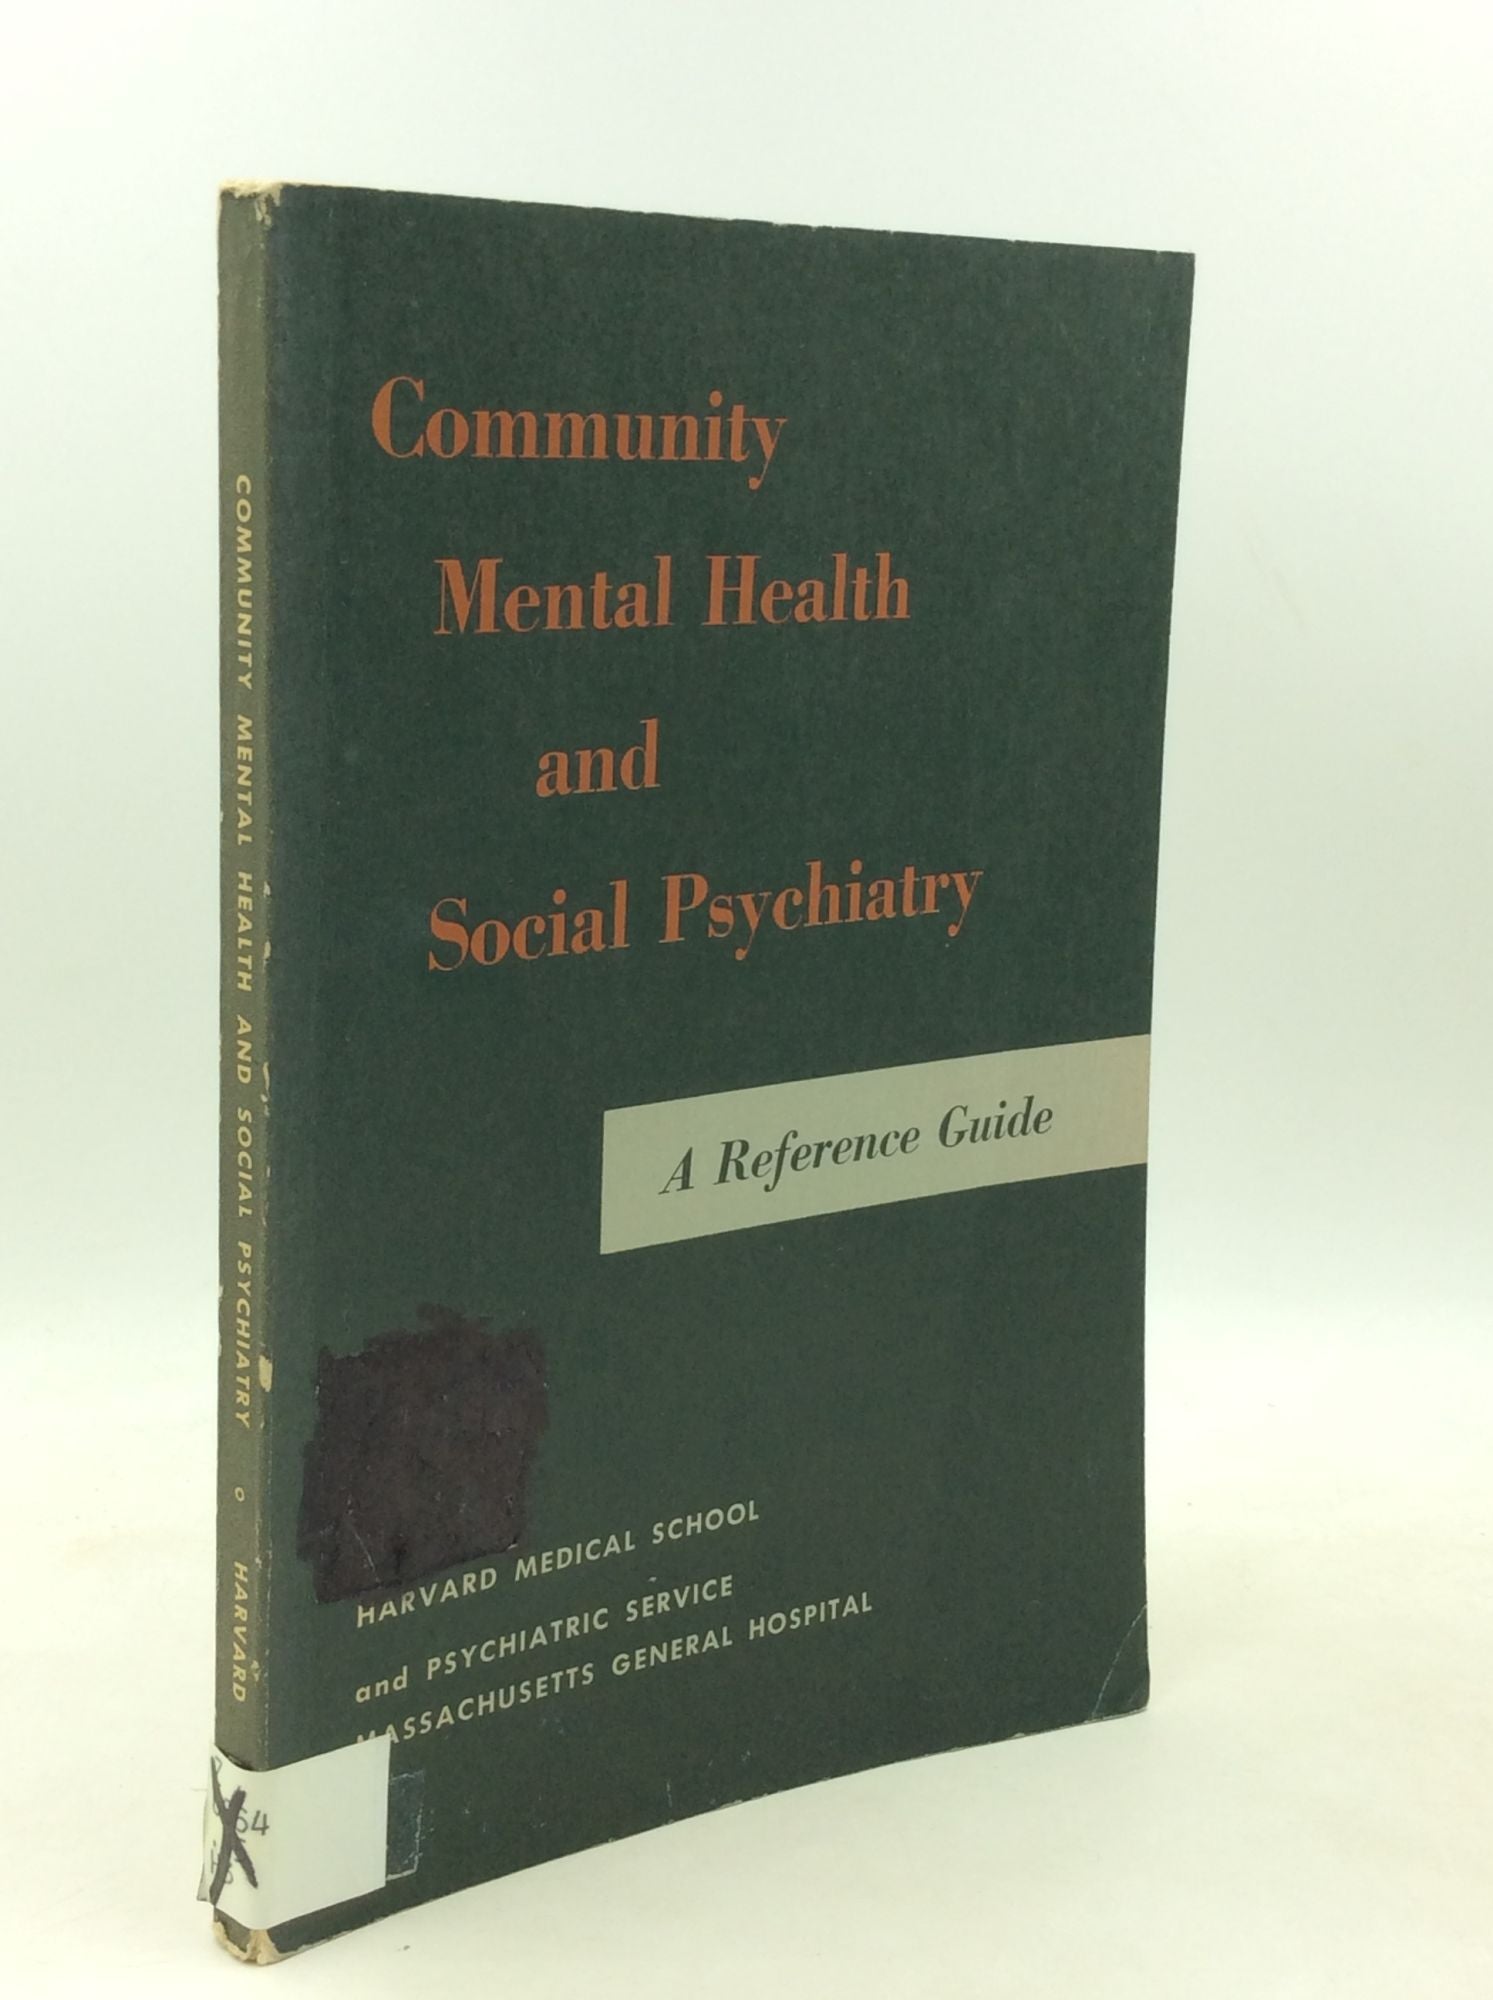 Harvard Medical School and Psychiatric Service, Massachusetts General Hospital - Community Mental Health and Social Psychiatry: A Reference Guide